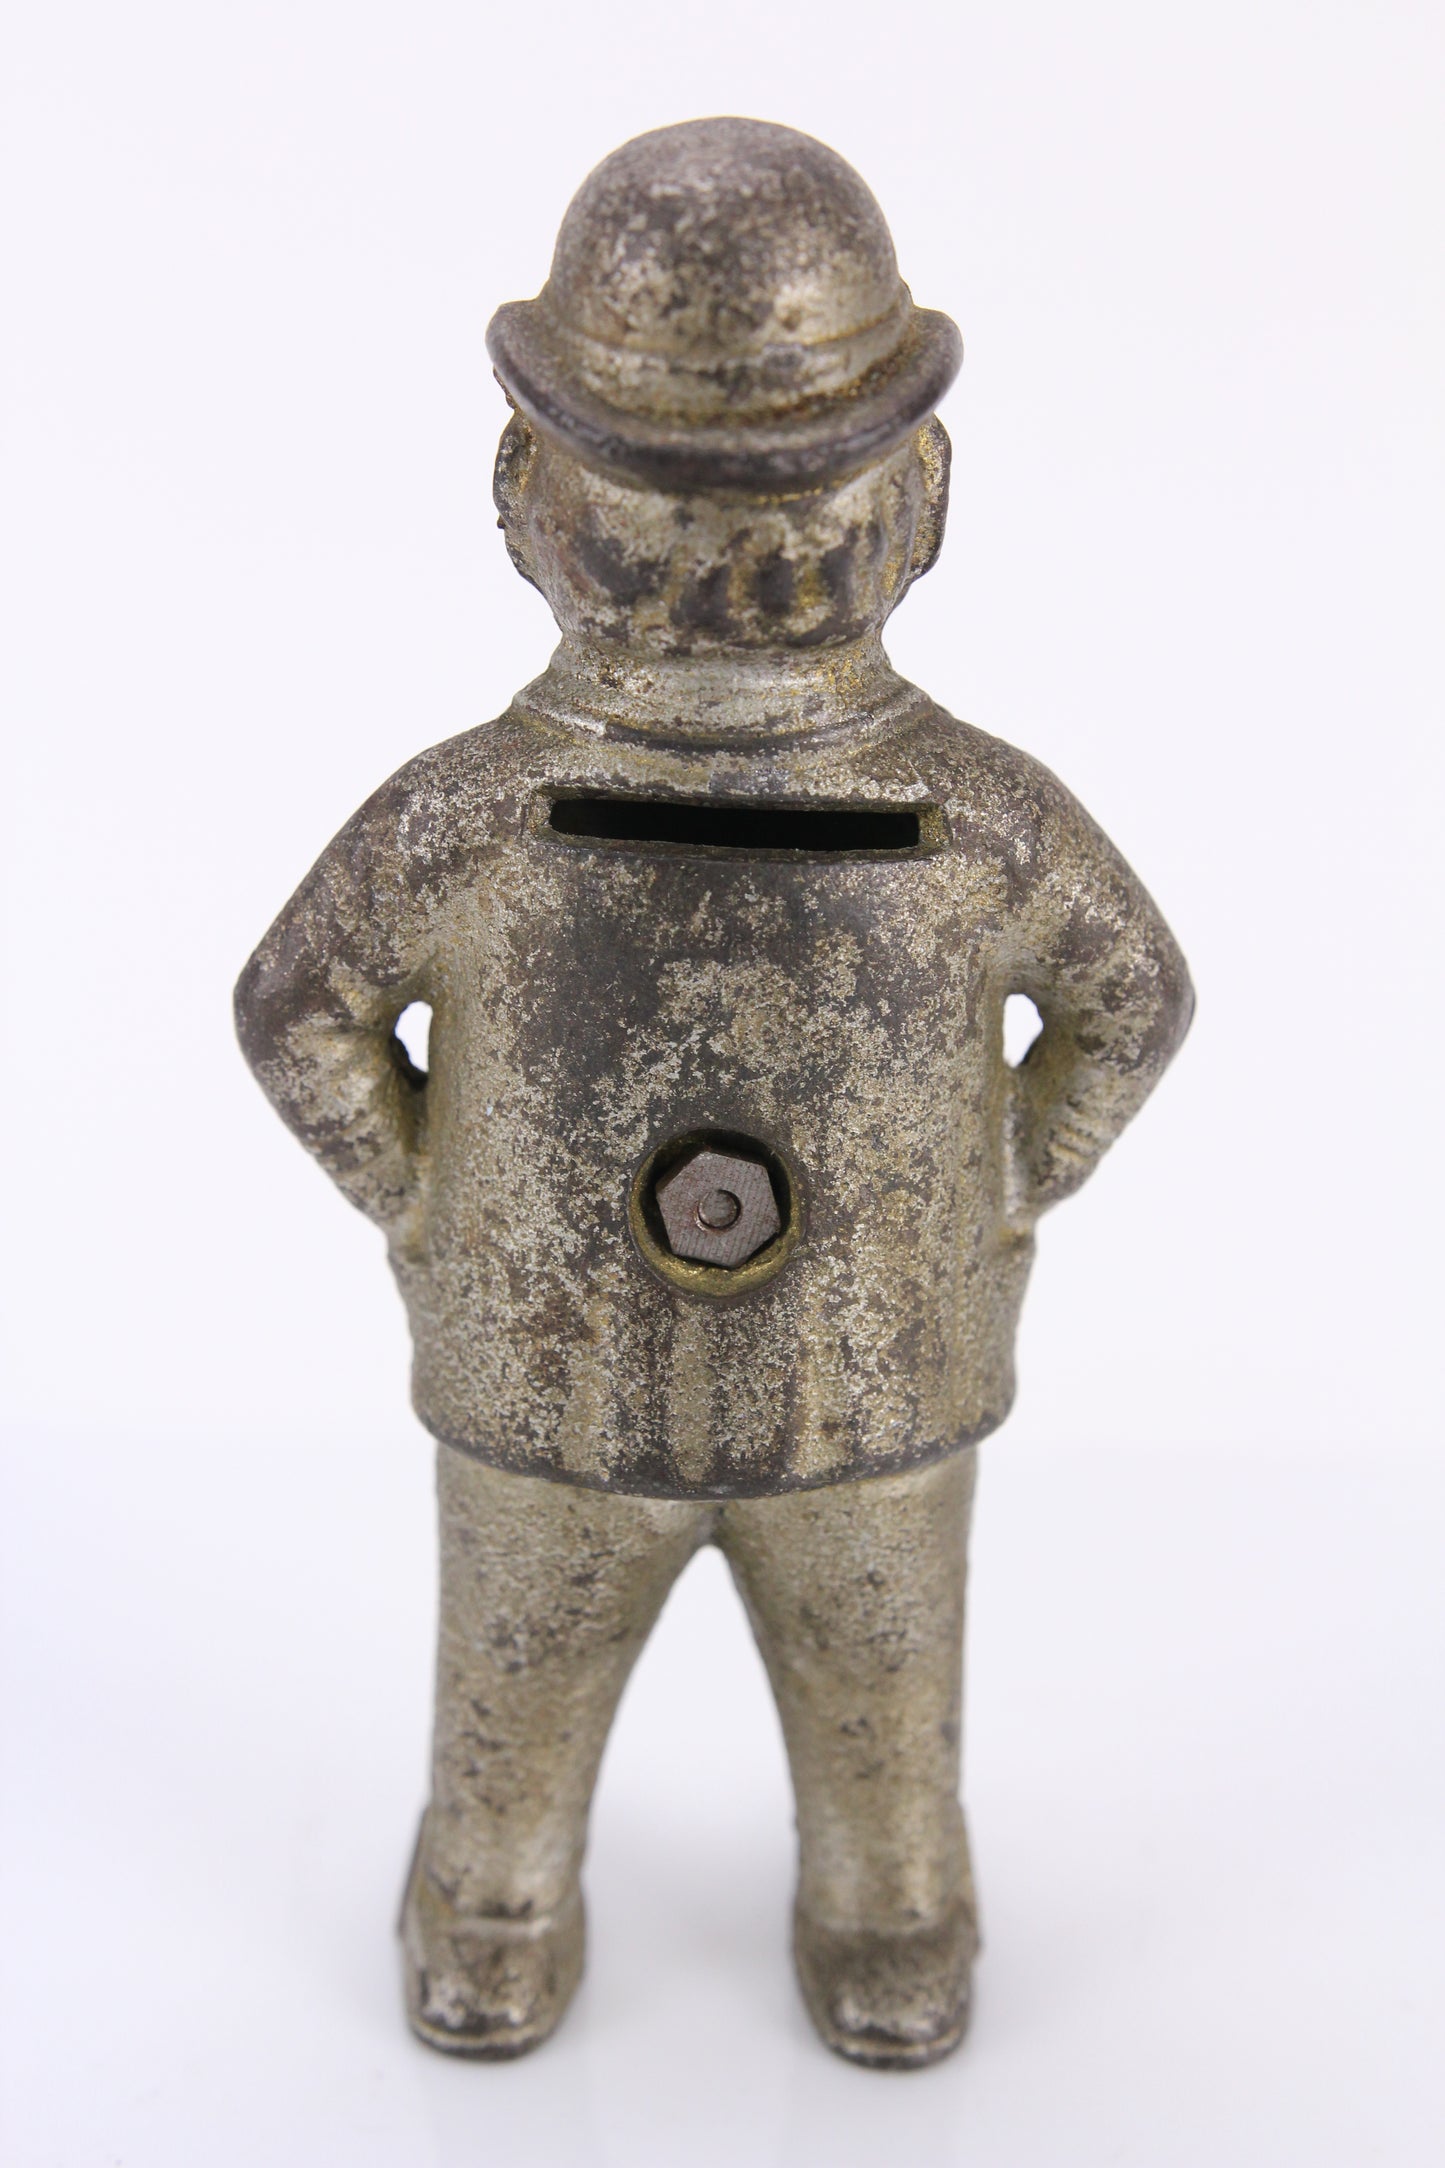 Antique Cast Iron Business Man Banker with Bowler Hat Still Coin Bank